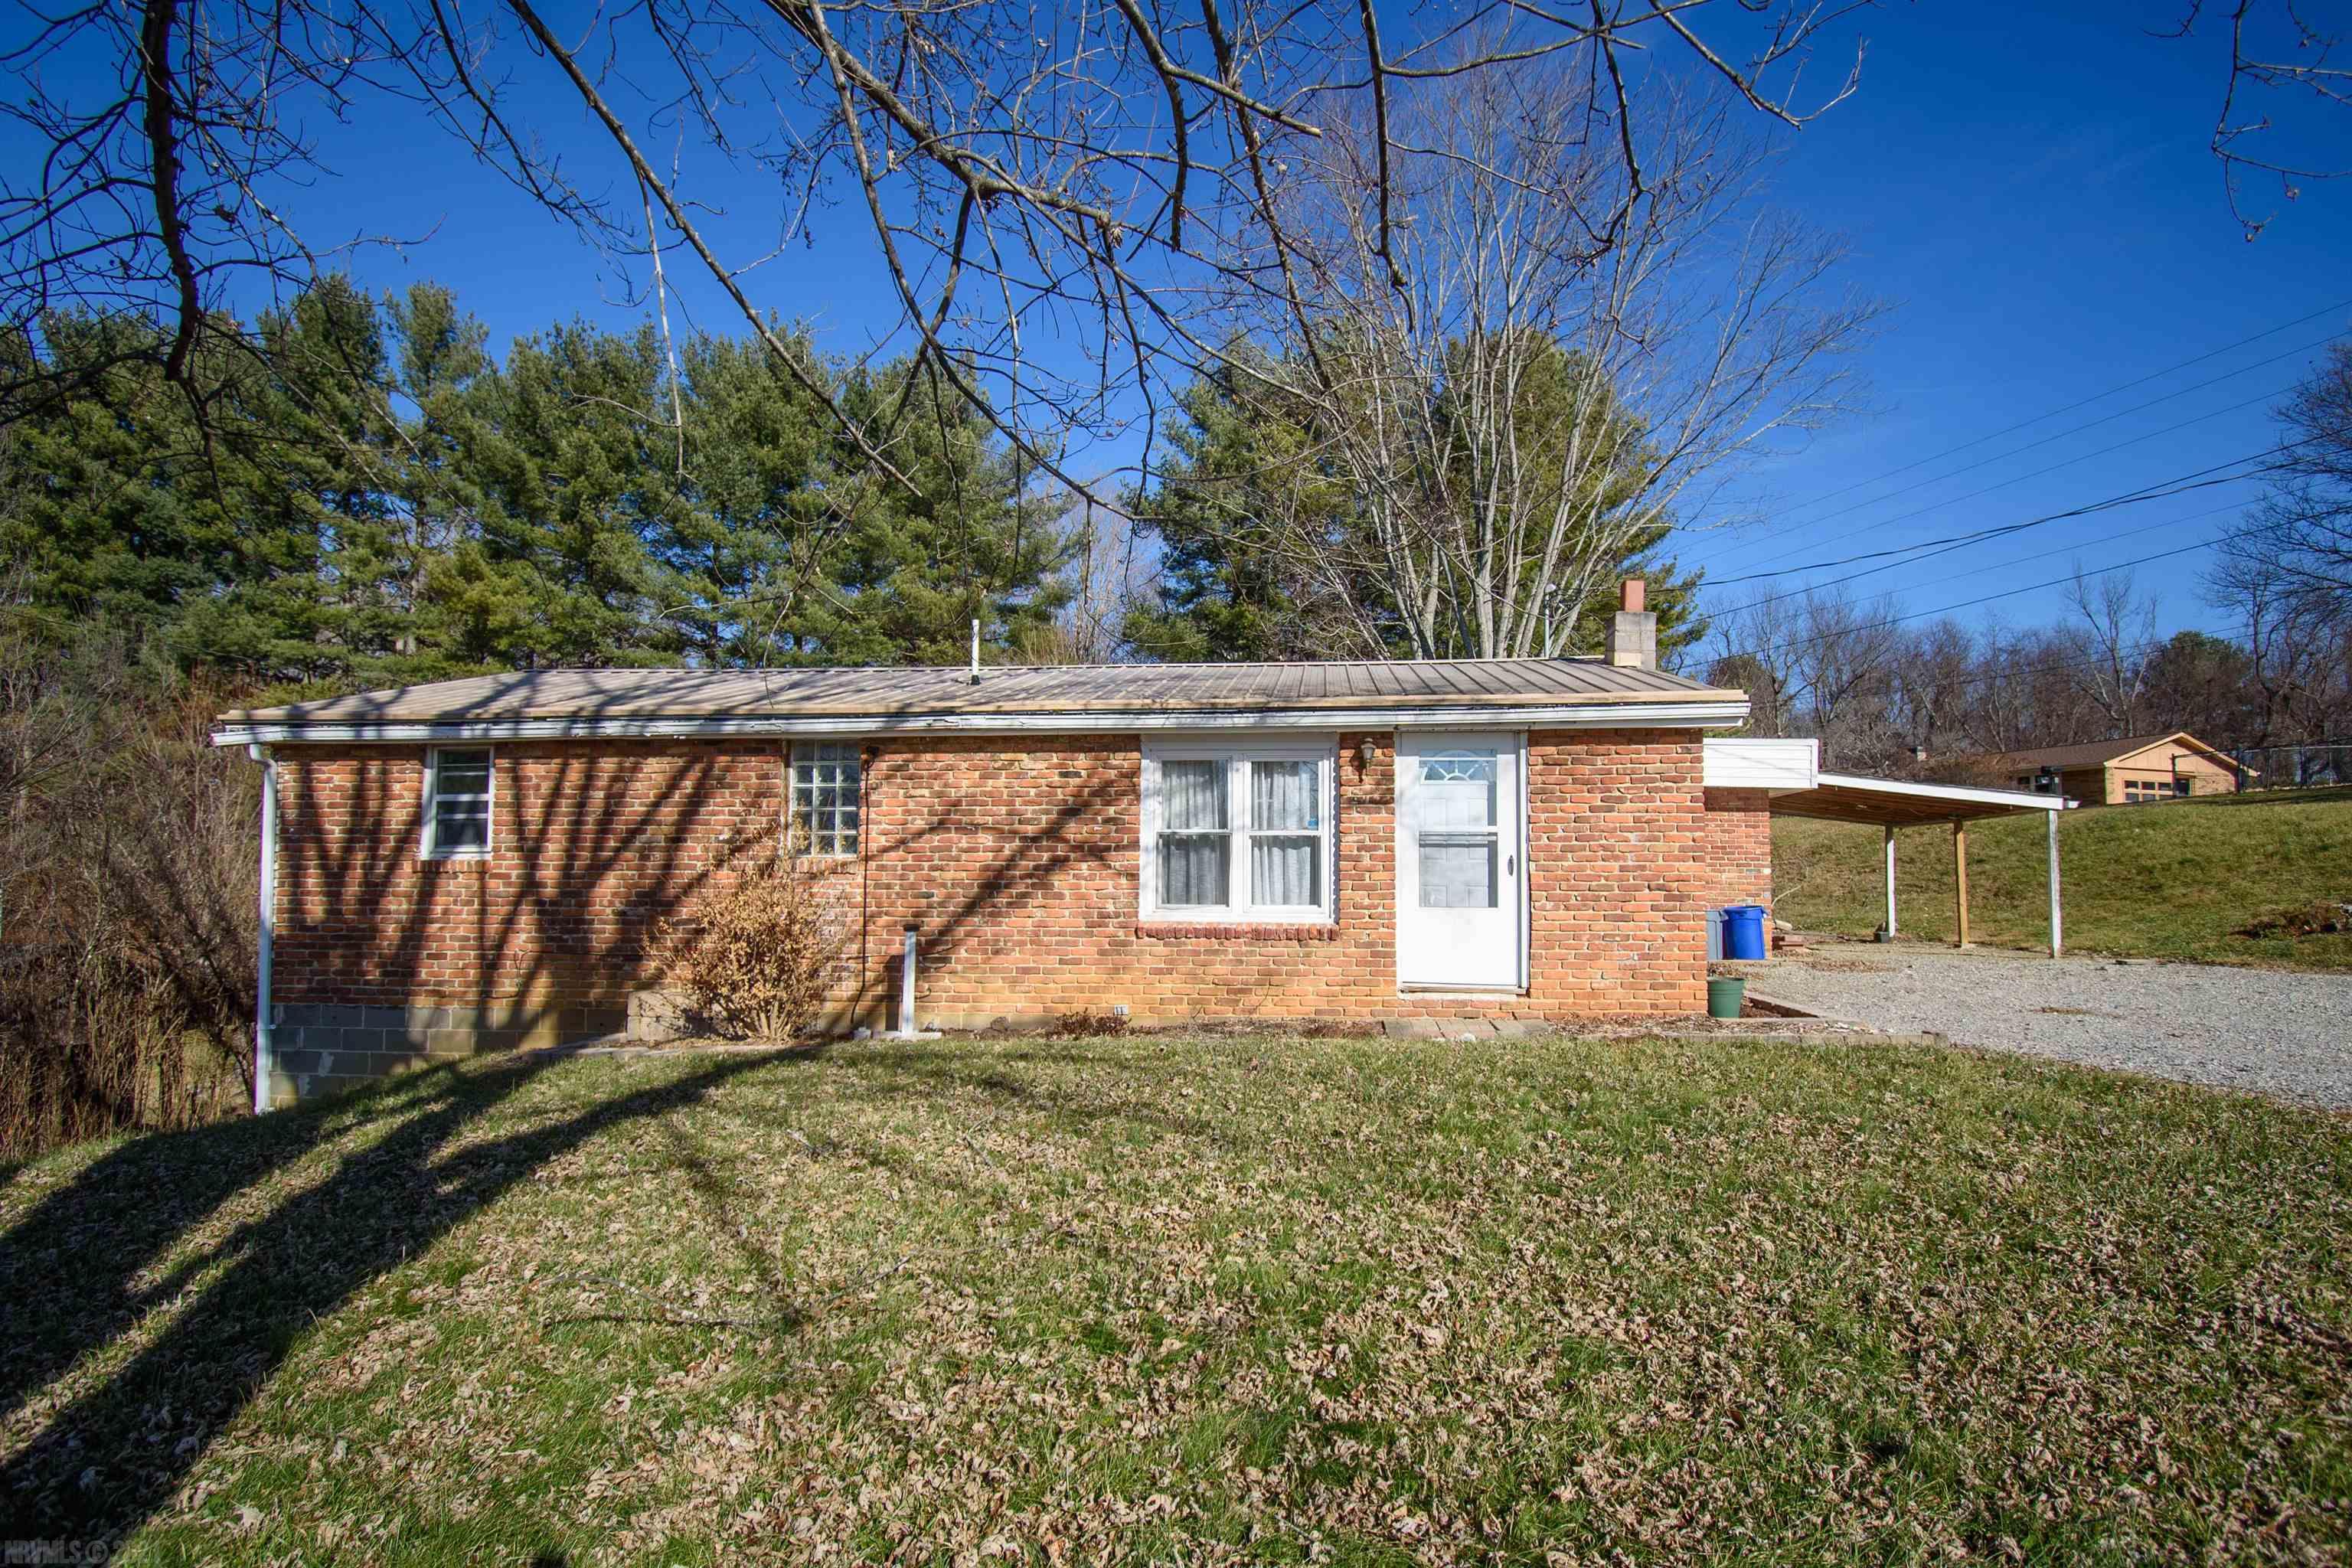 This brick ranch in a quaint neighborhood is great as a starter home, investment, or for downsizing empty-nesters. House needs substantial TLC, but offers a great opportunity for sweat equity. Great yard and quiet street. Sold as-is.